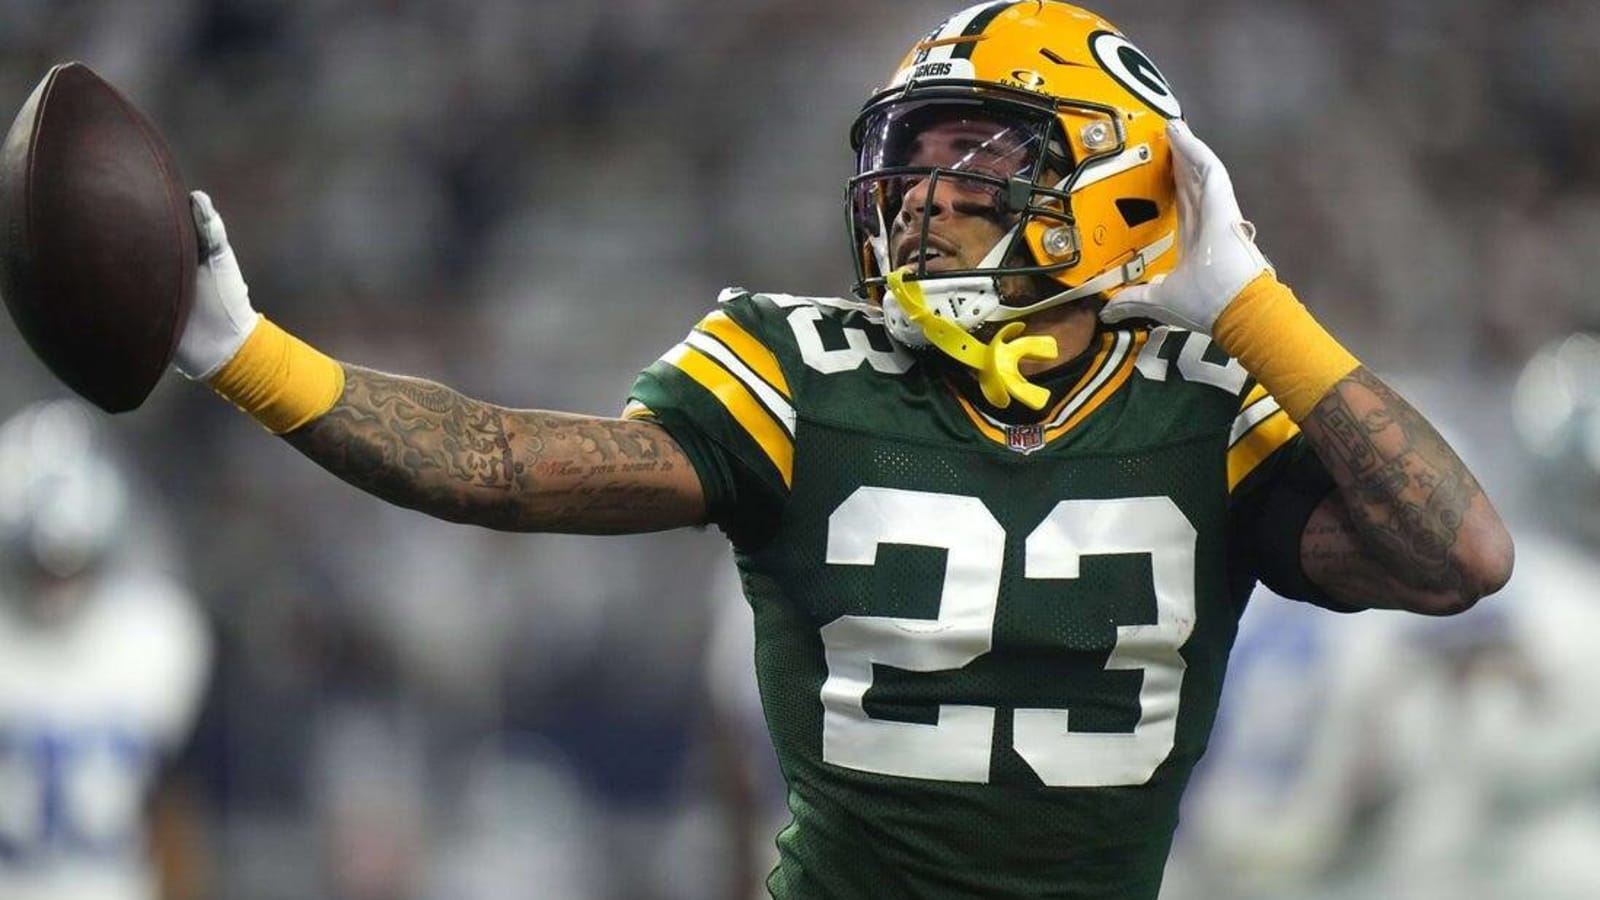 Packers hopeful CB Jaire Alexander can play Saturday